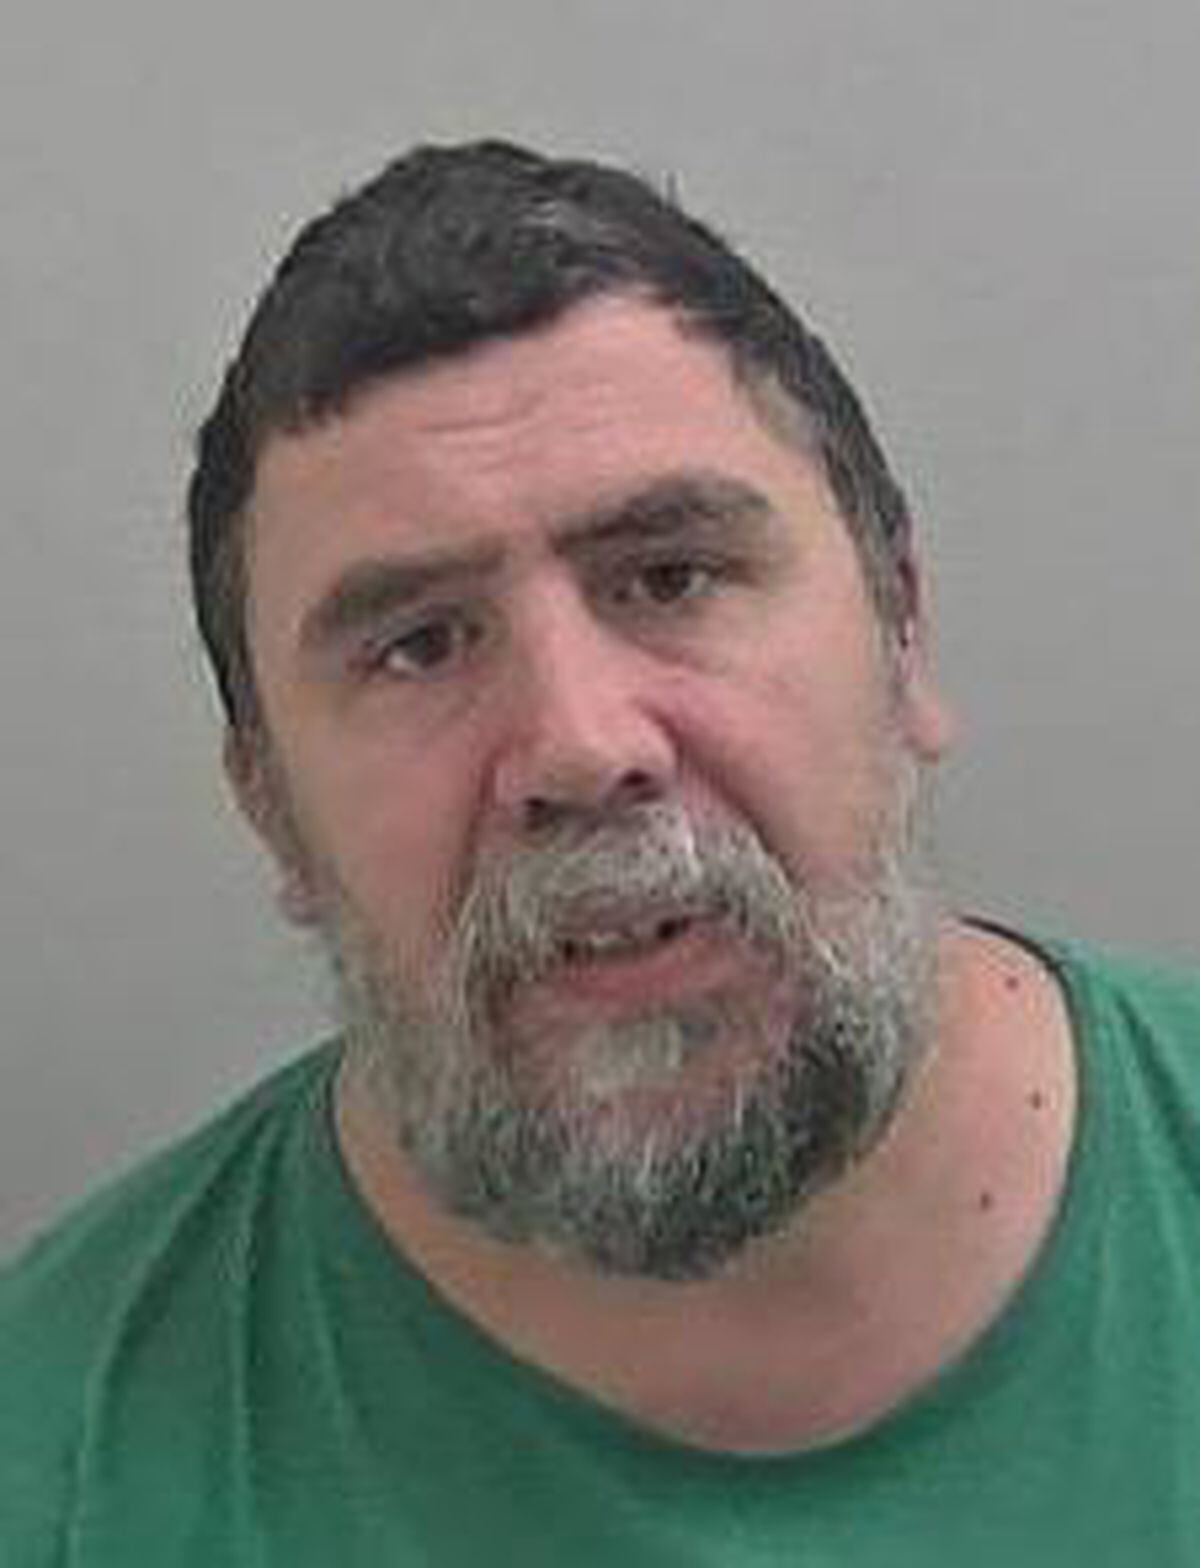 Karl Browning was jailed for four years